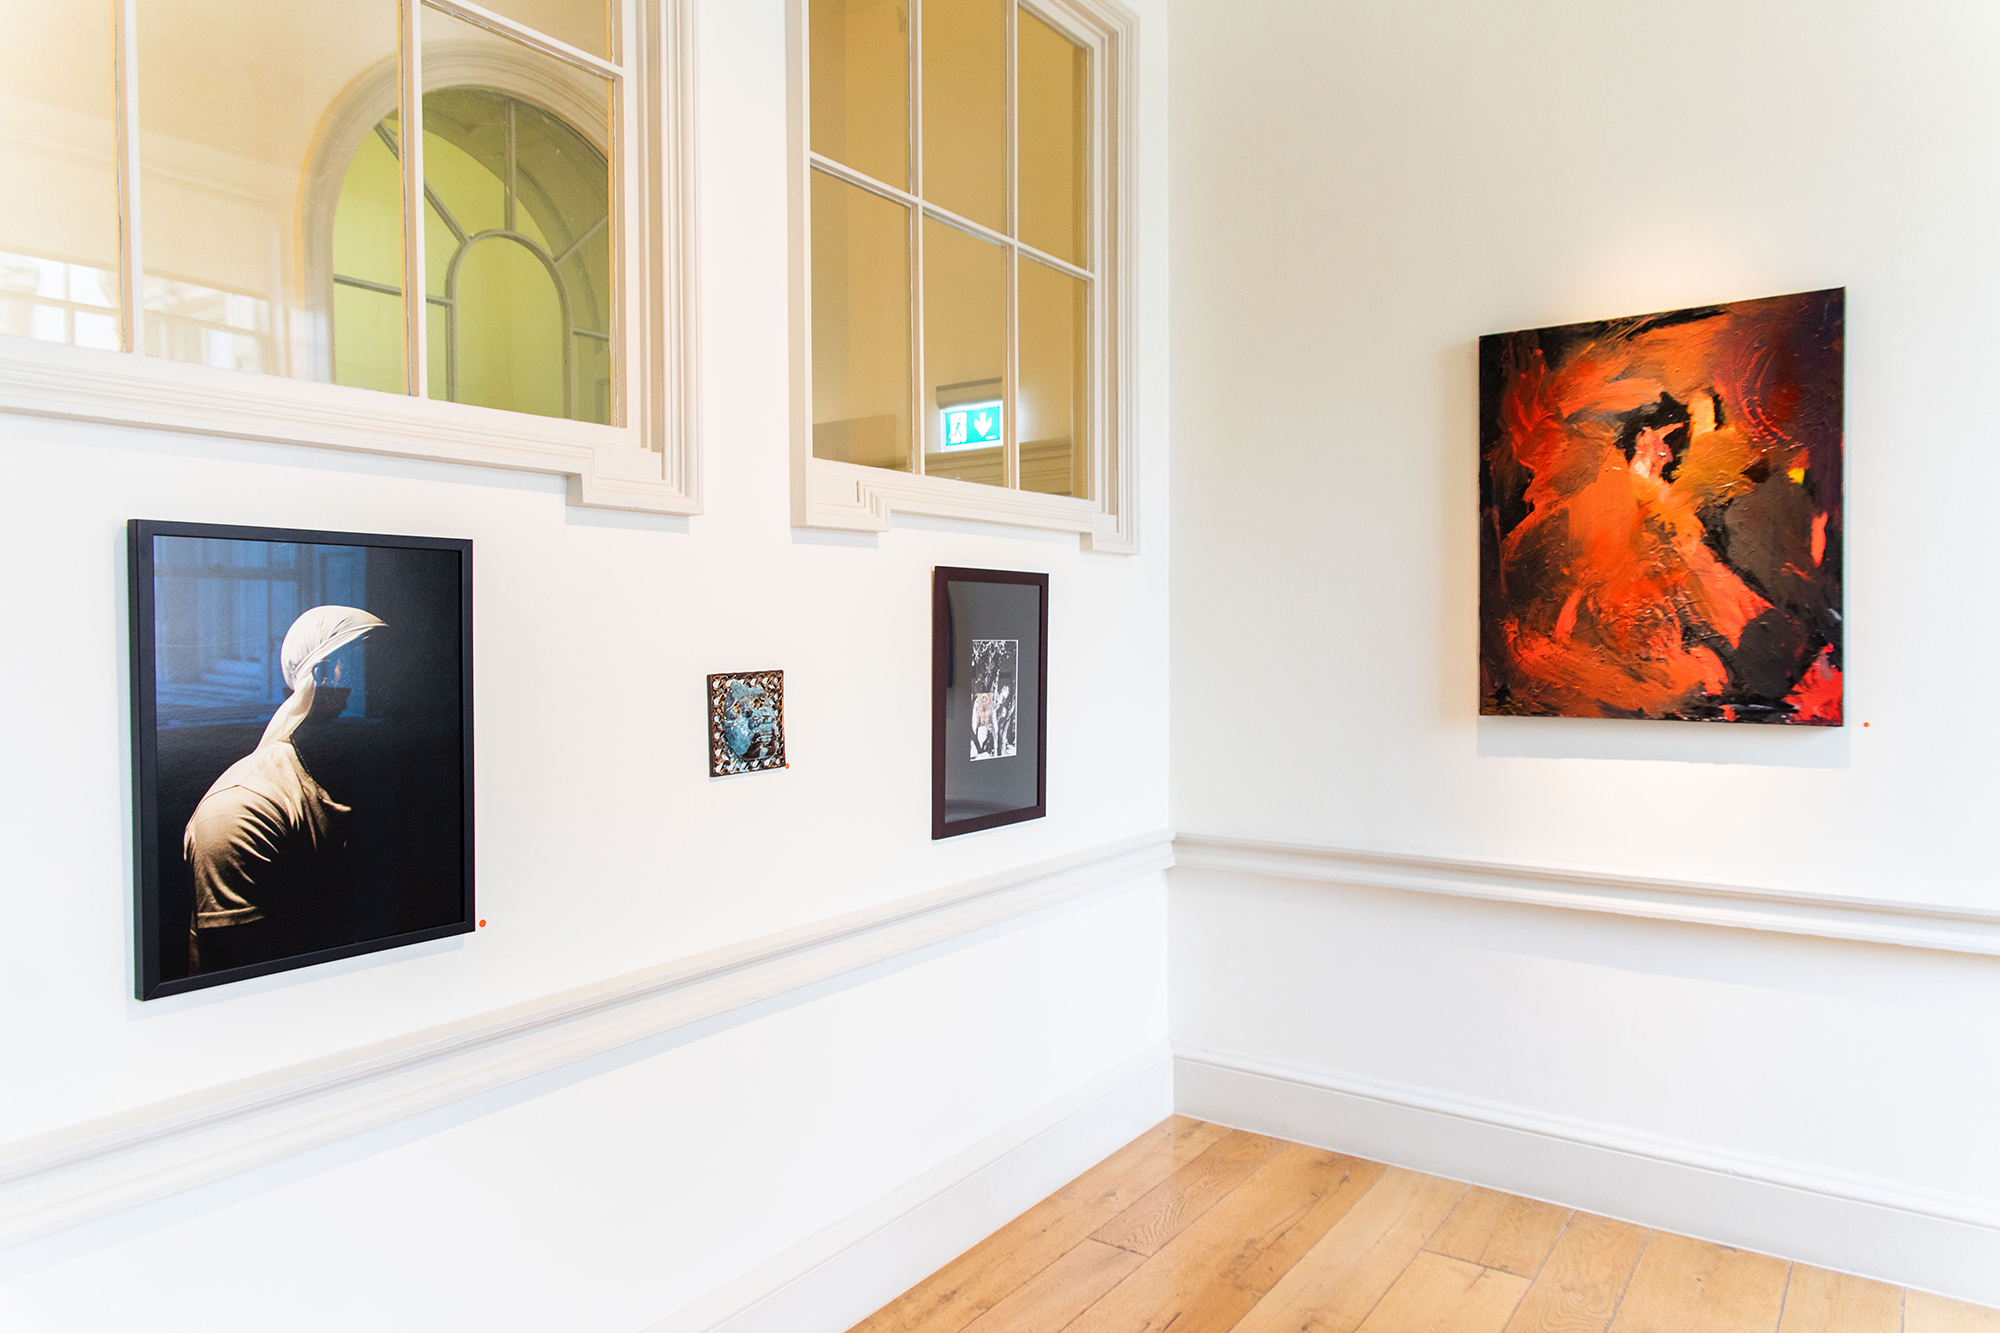 View of the corner of a gallery room. Two white walls, on the right side 3 artworks are hanging, a photograph of a dark skinned person with white clothes against a white background, a blue and brown ceramic piece depicting a face and a black and white photograph. On the right wall, an abstract painting in shades of red.